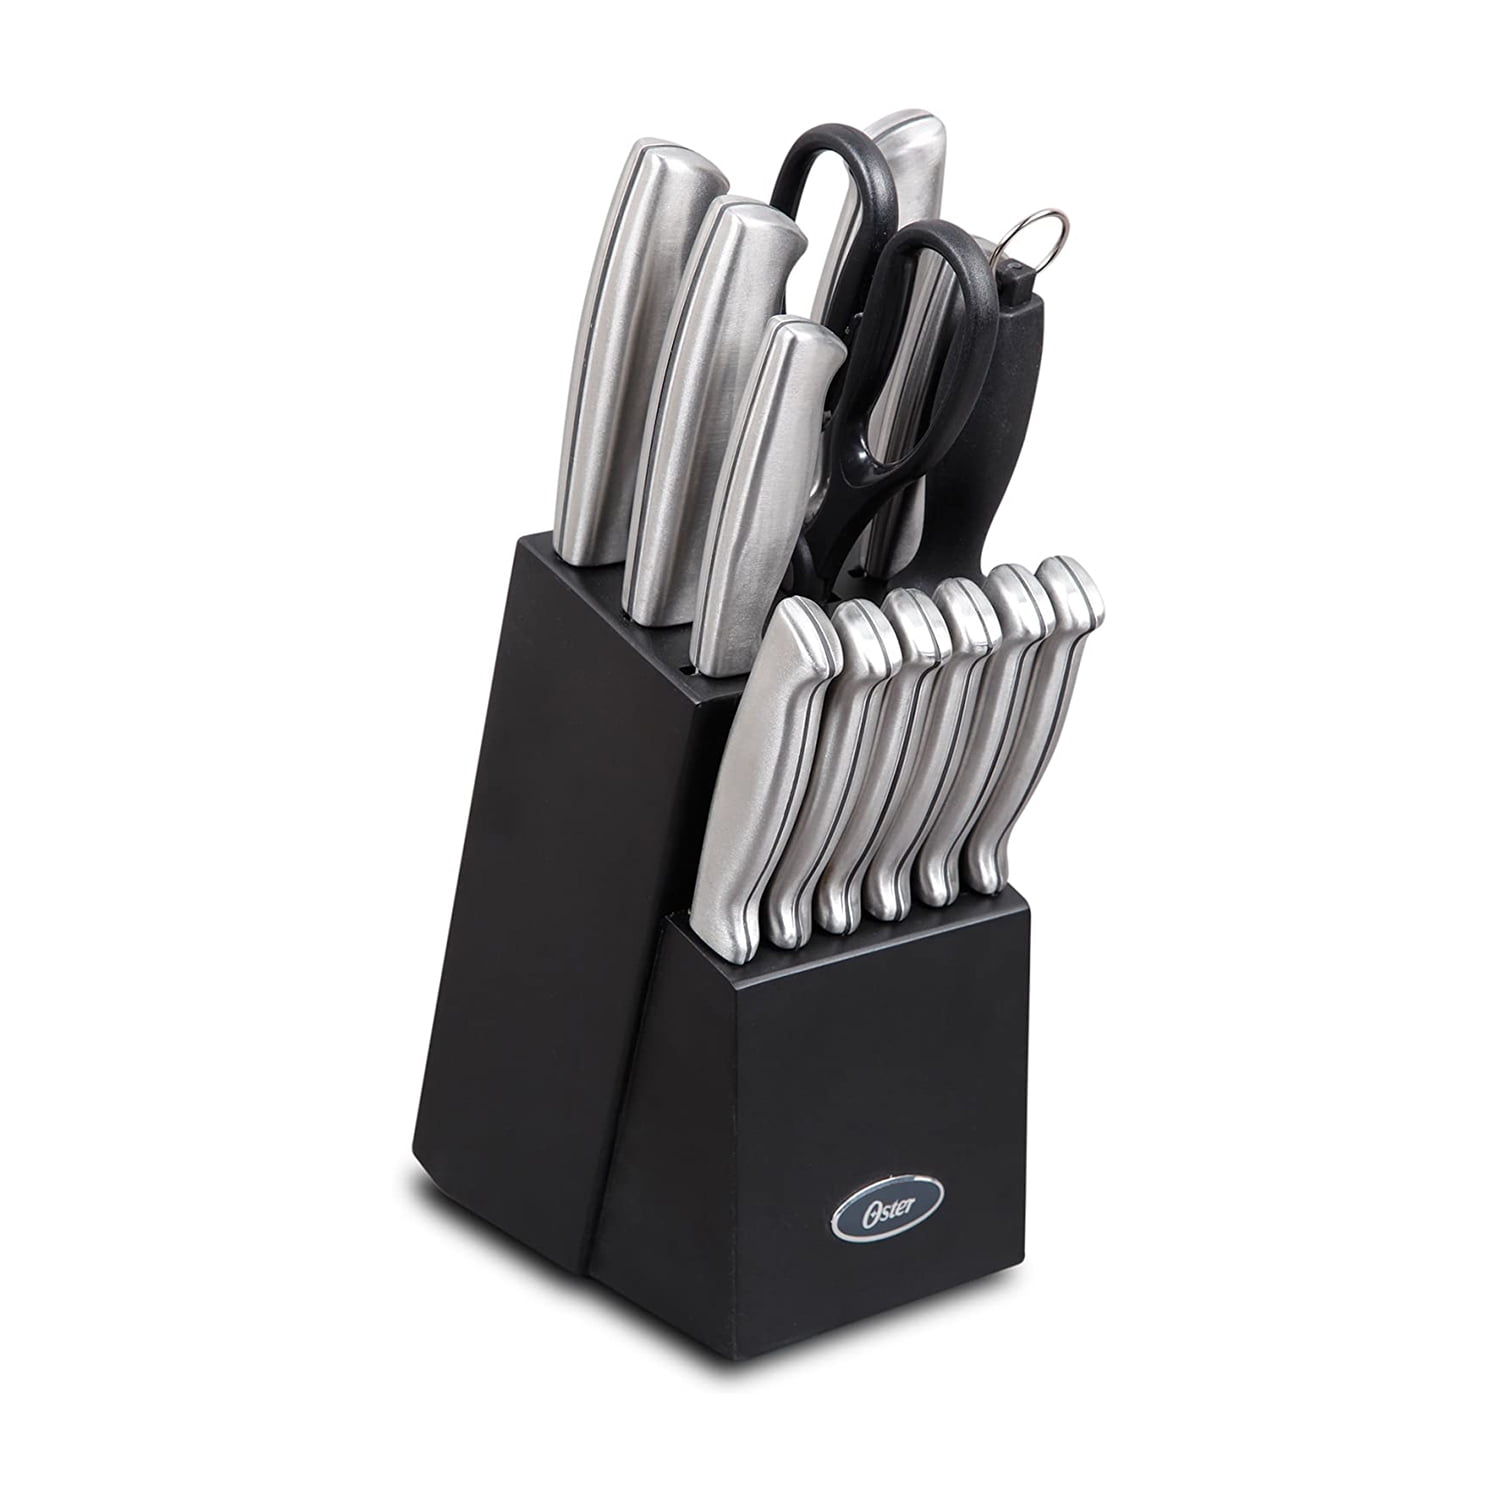 Rogers Cutlery Master Guild 5 pc Knife Set Vintage Stainless with Block -  NEW